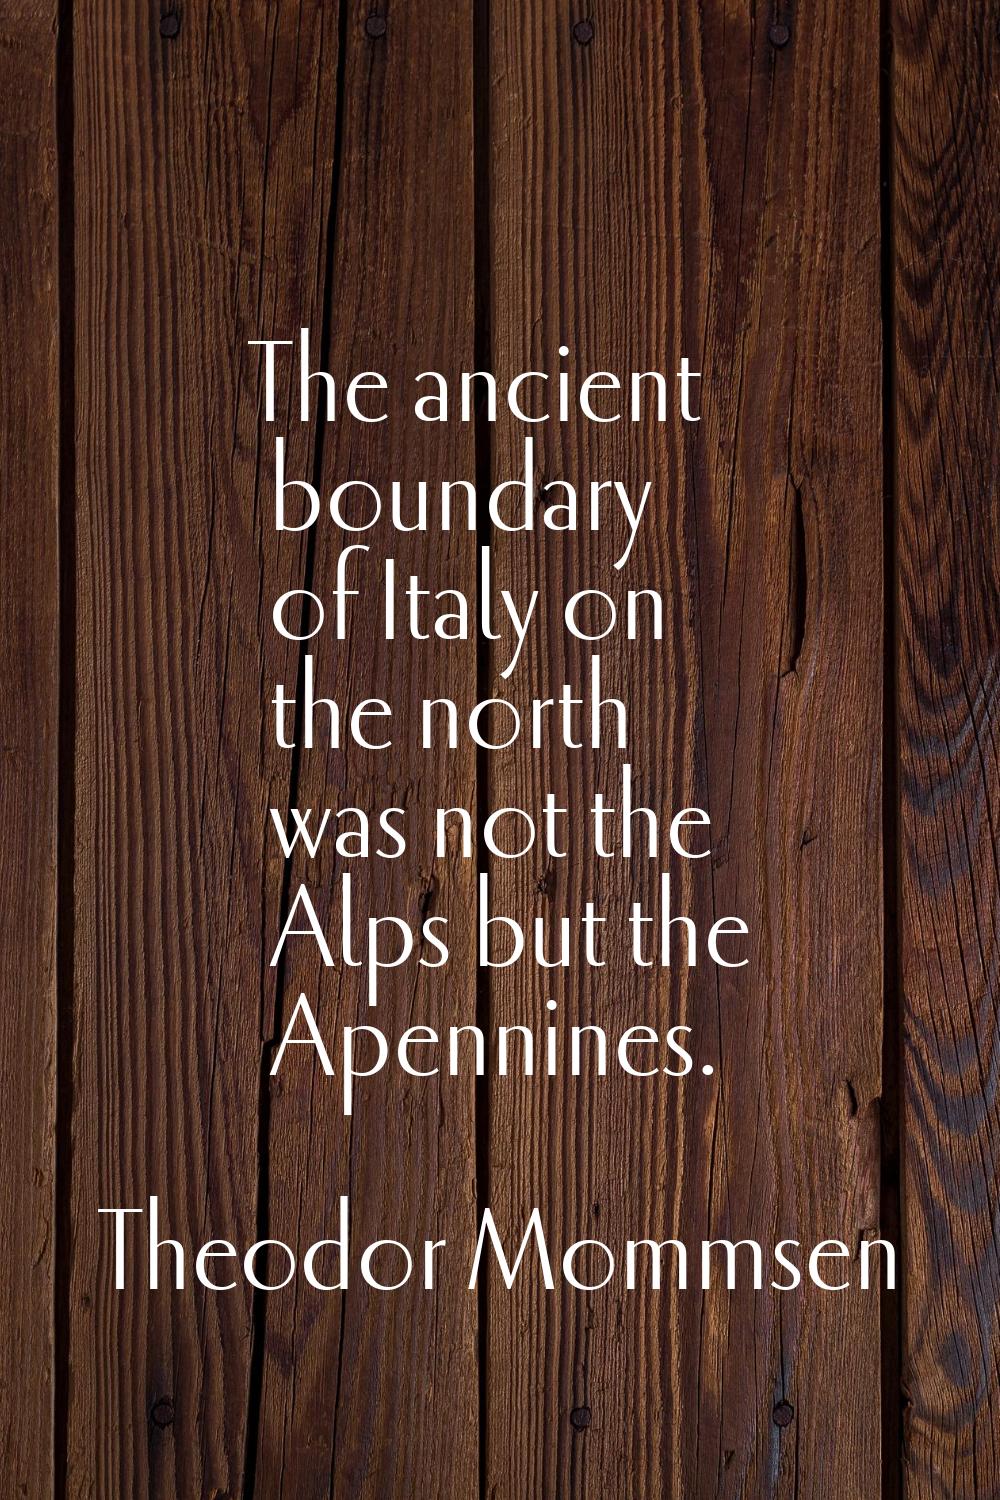 The ancient boundary of Italy on the north was not the Alps but the Apennines.